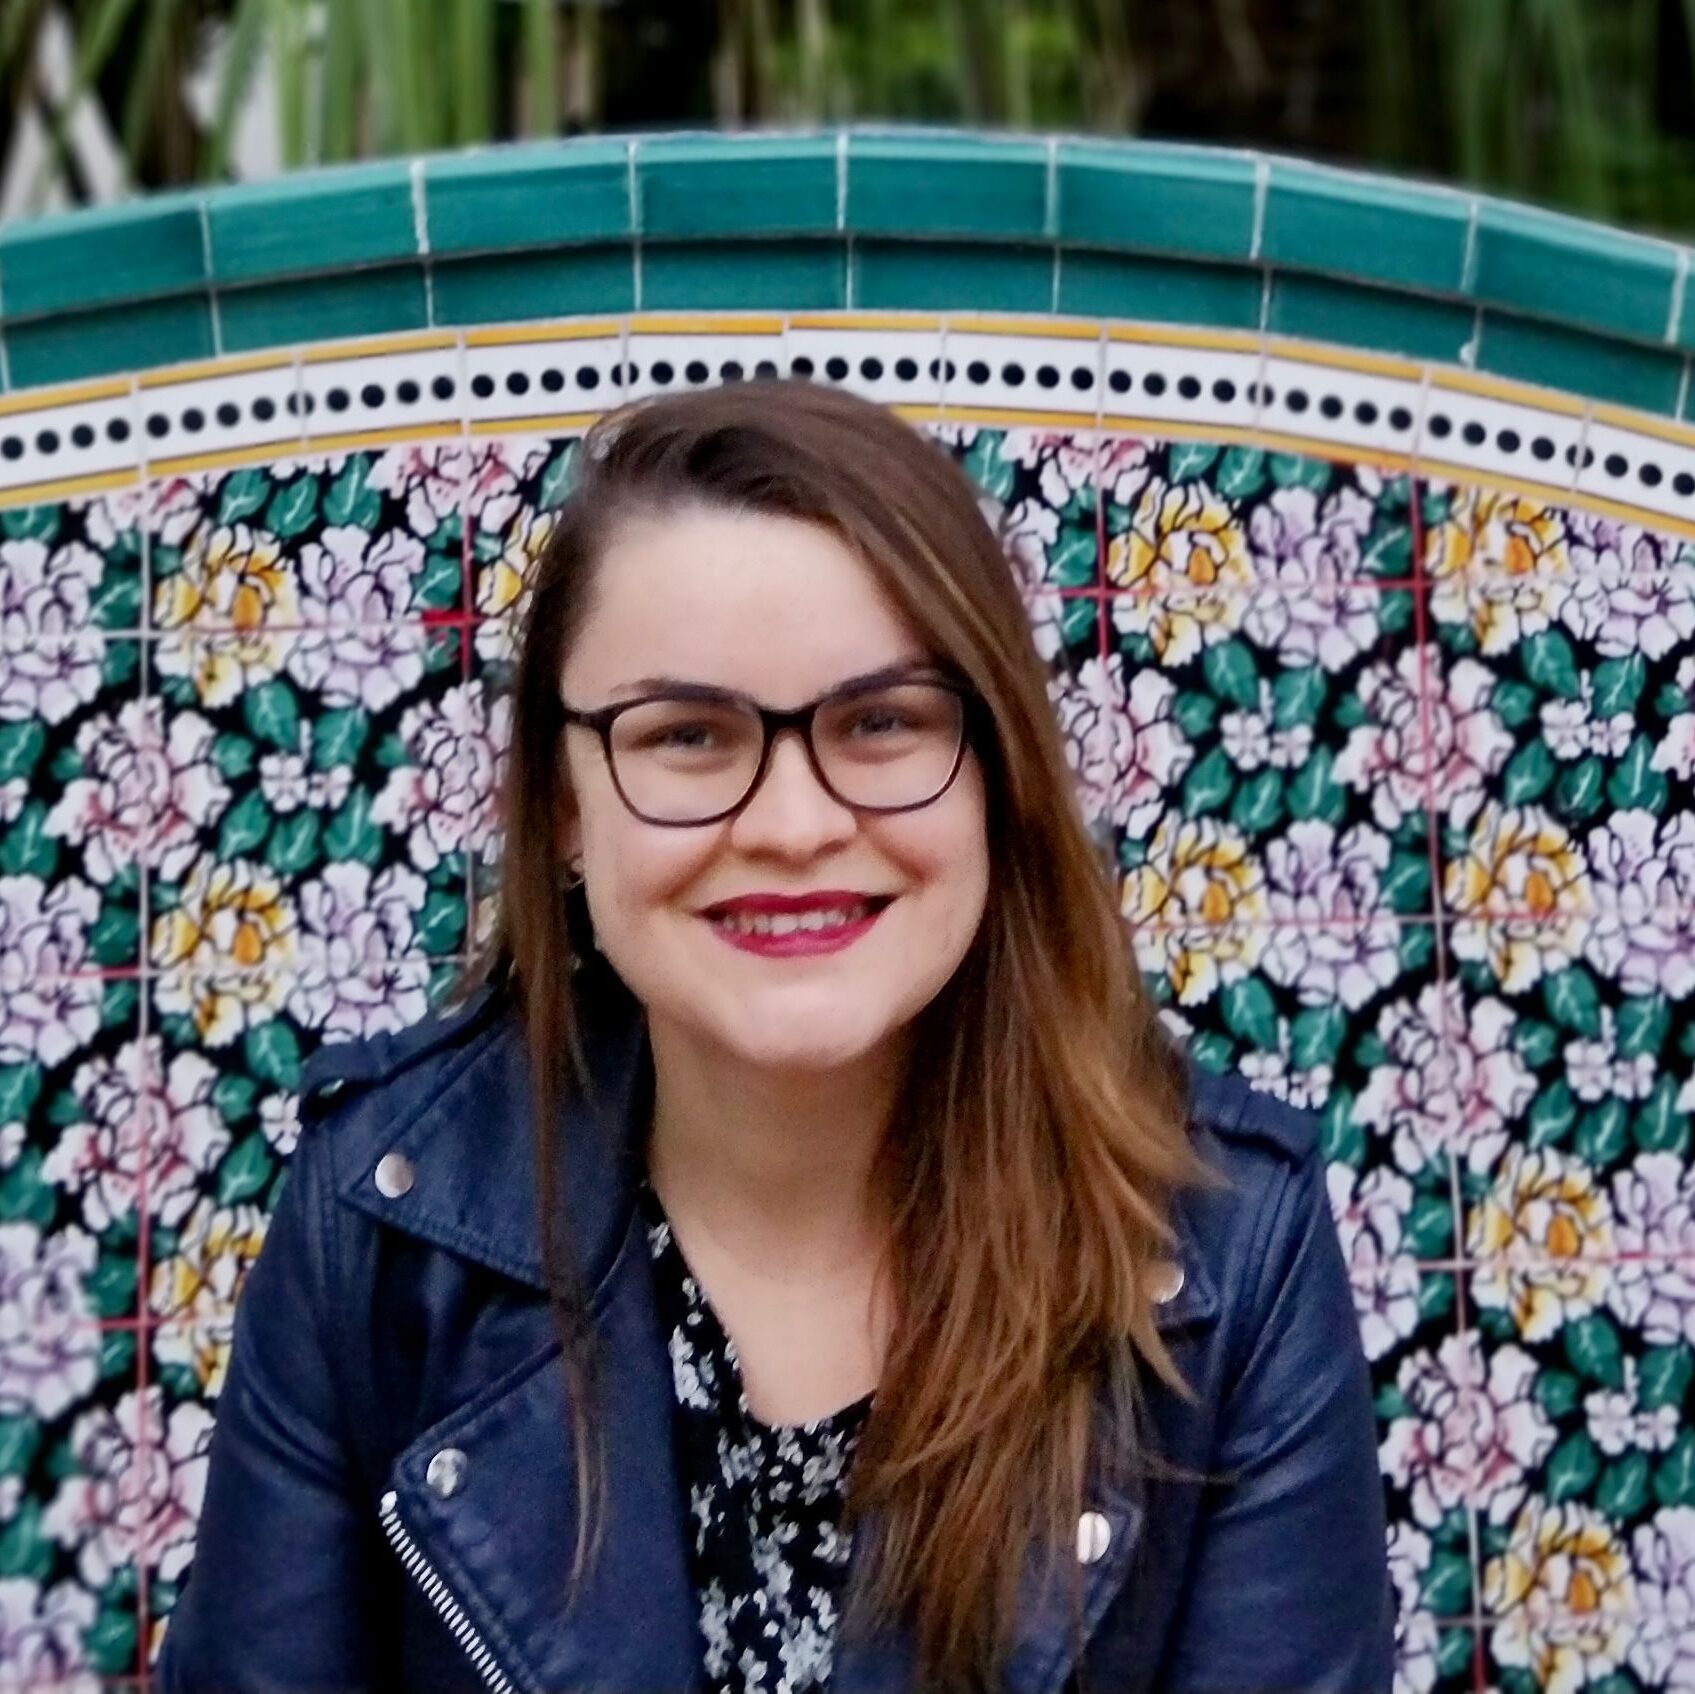 A woman with glasses smiling in front of colourful flower mosaic